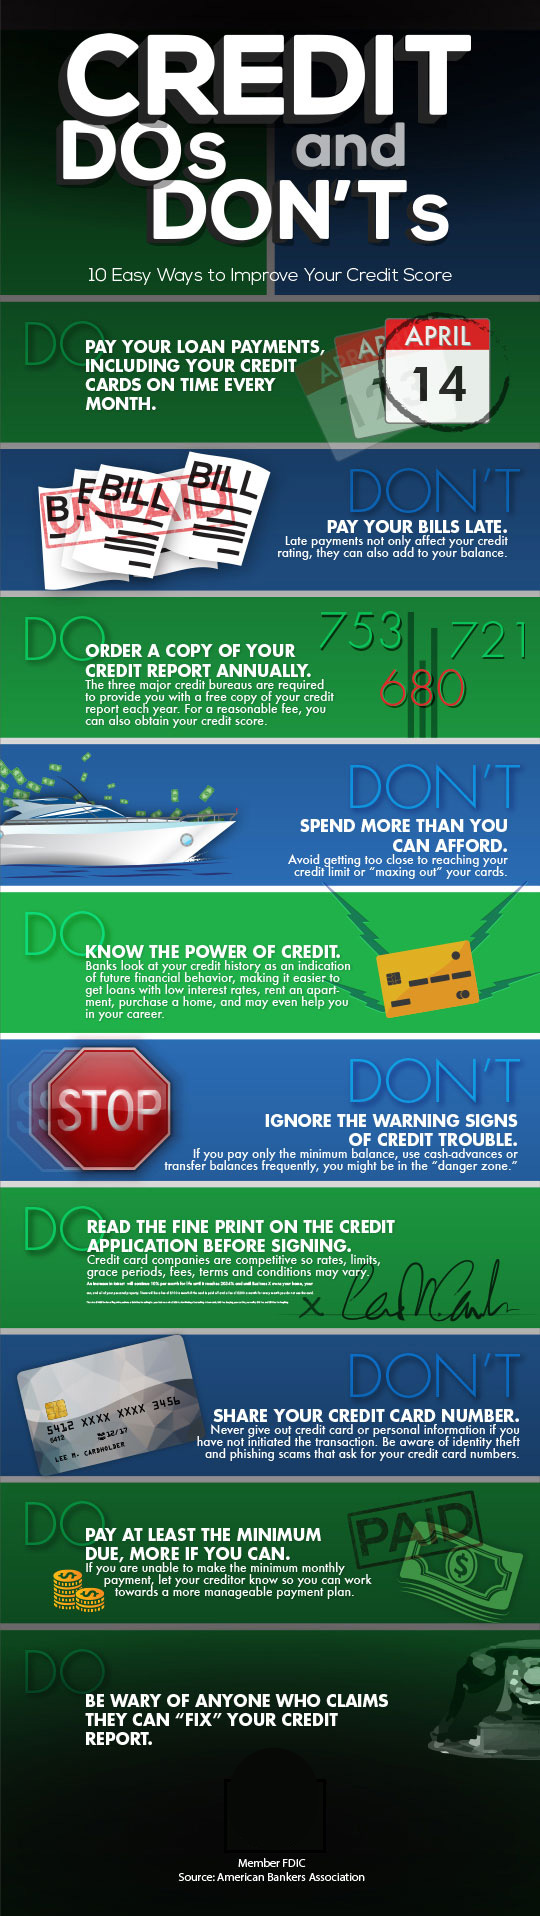 Infographic showing credit do's and don'ts